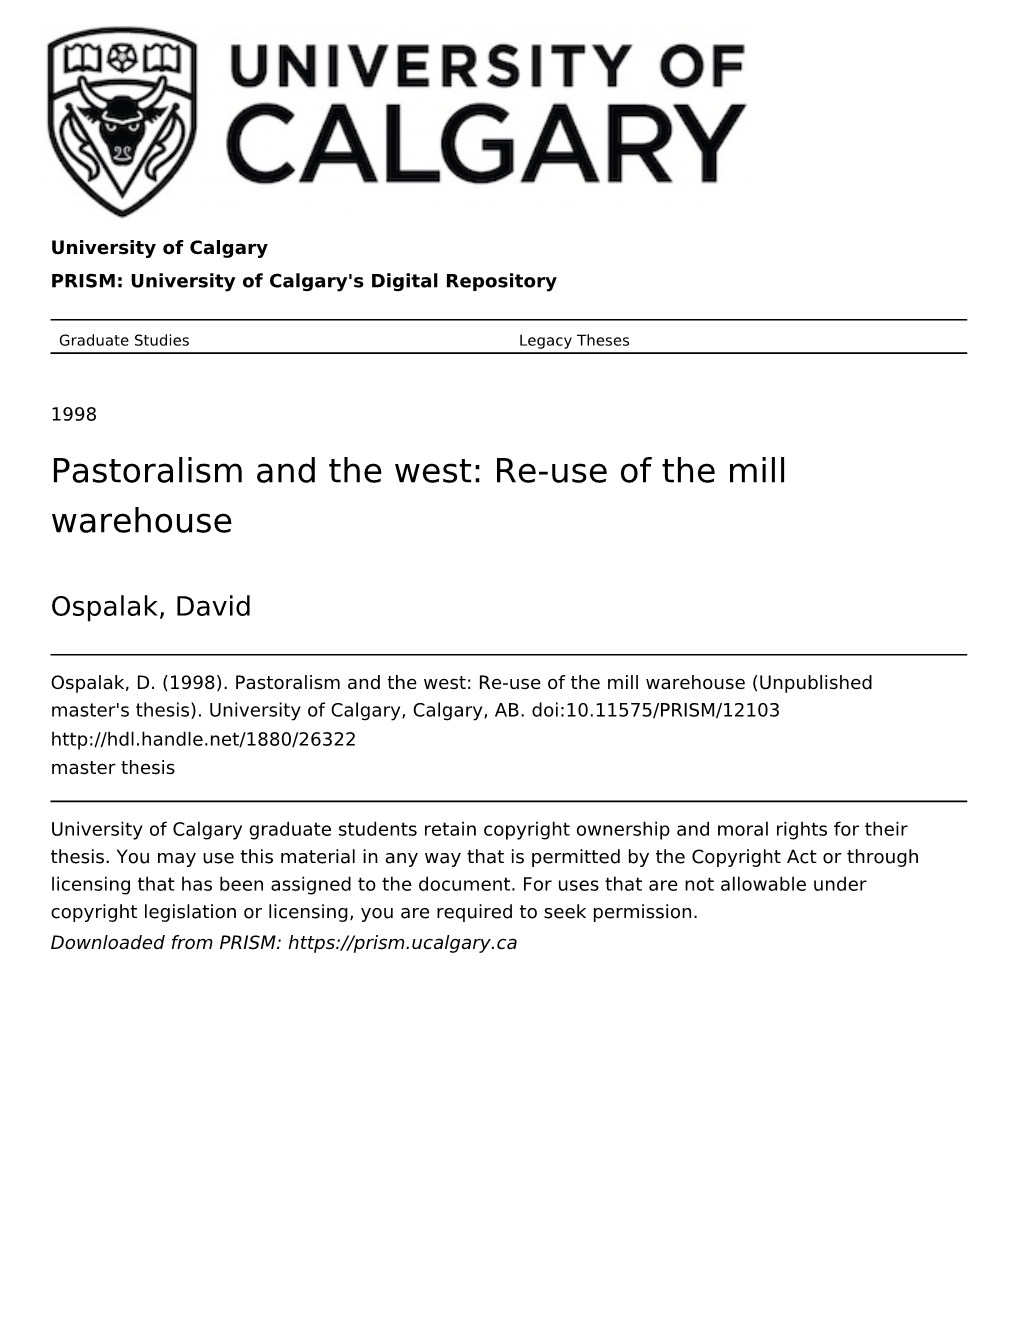 Pastoralism and the West: Re-Use of the Mill Warehouse